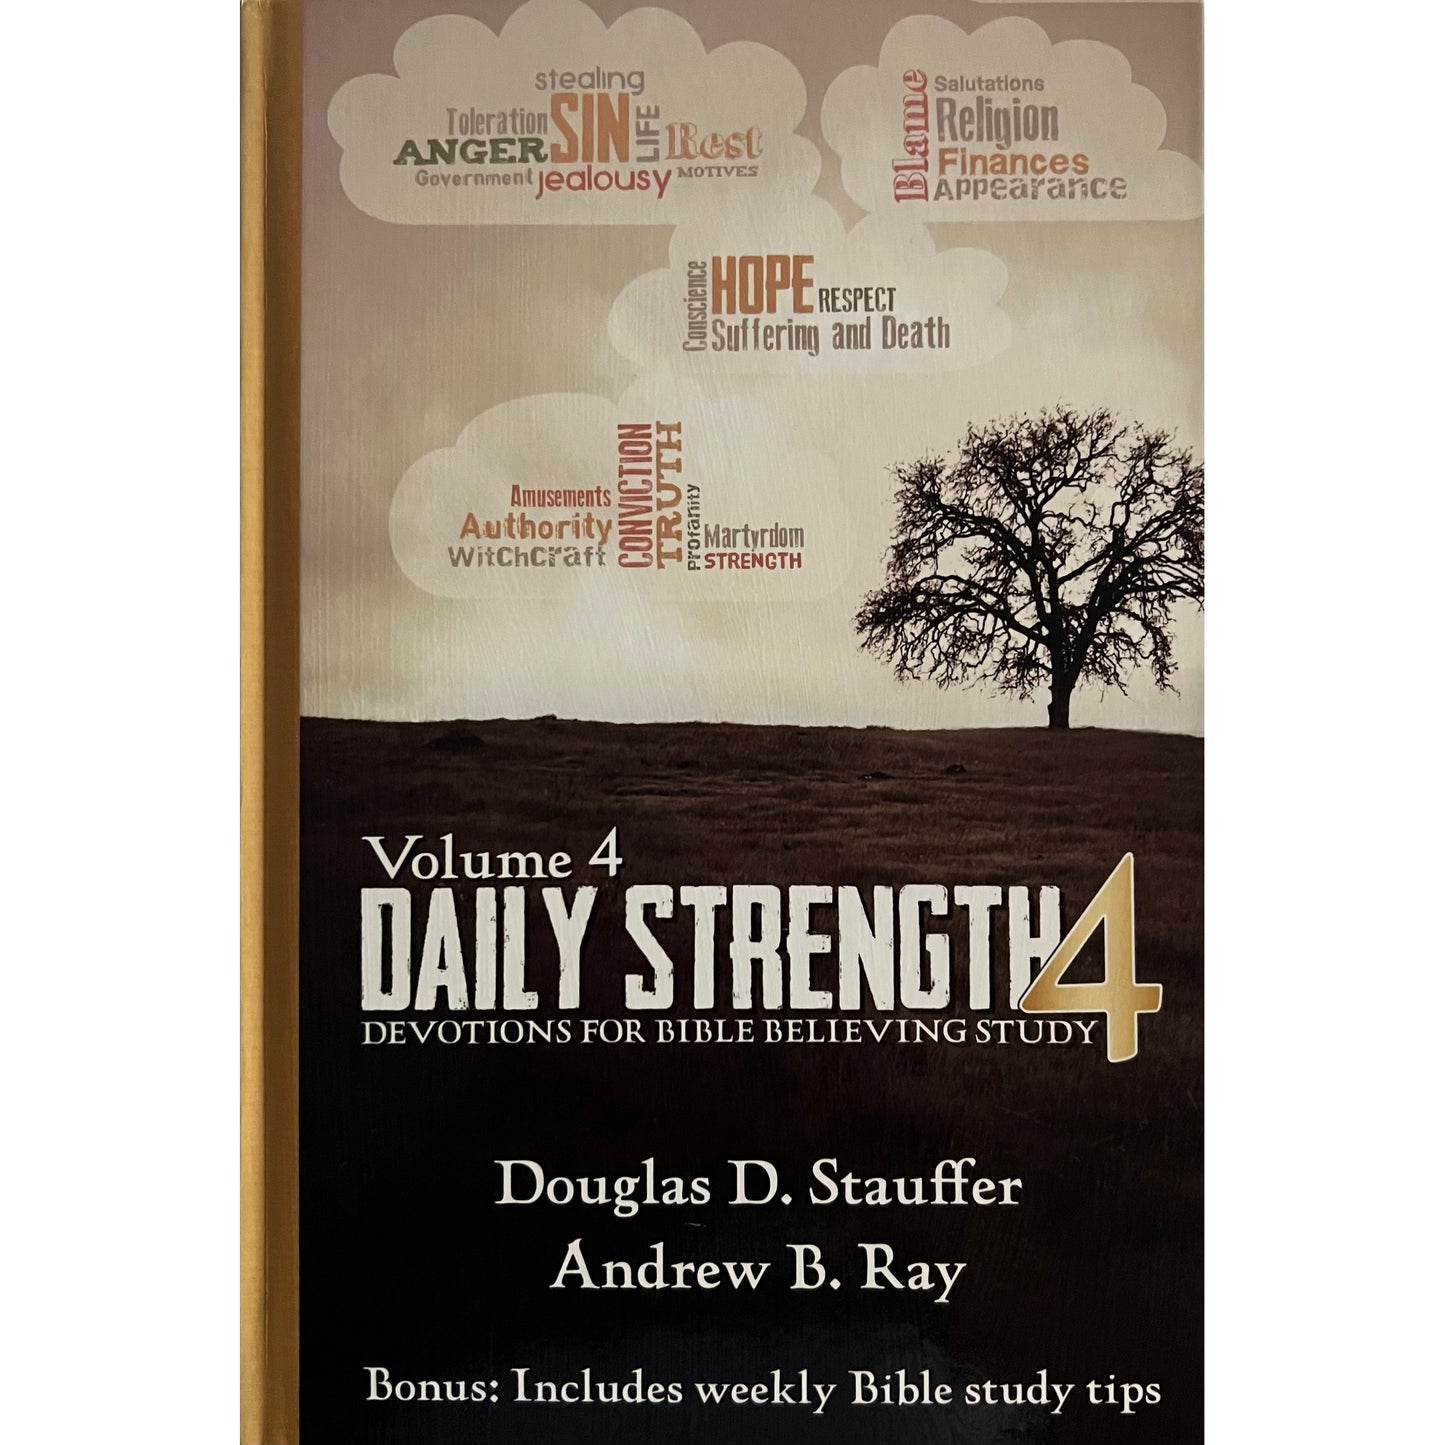 Daily Strength IV: Devotions for Bible-Believing Study